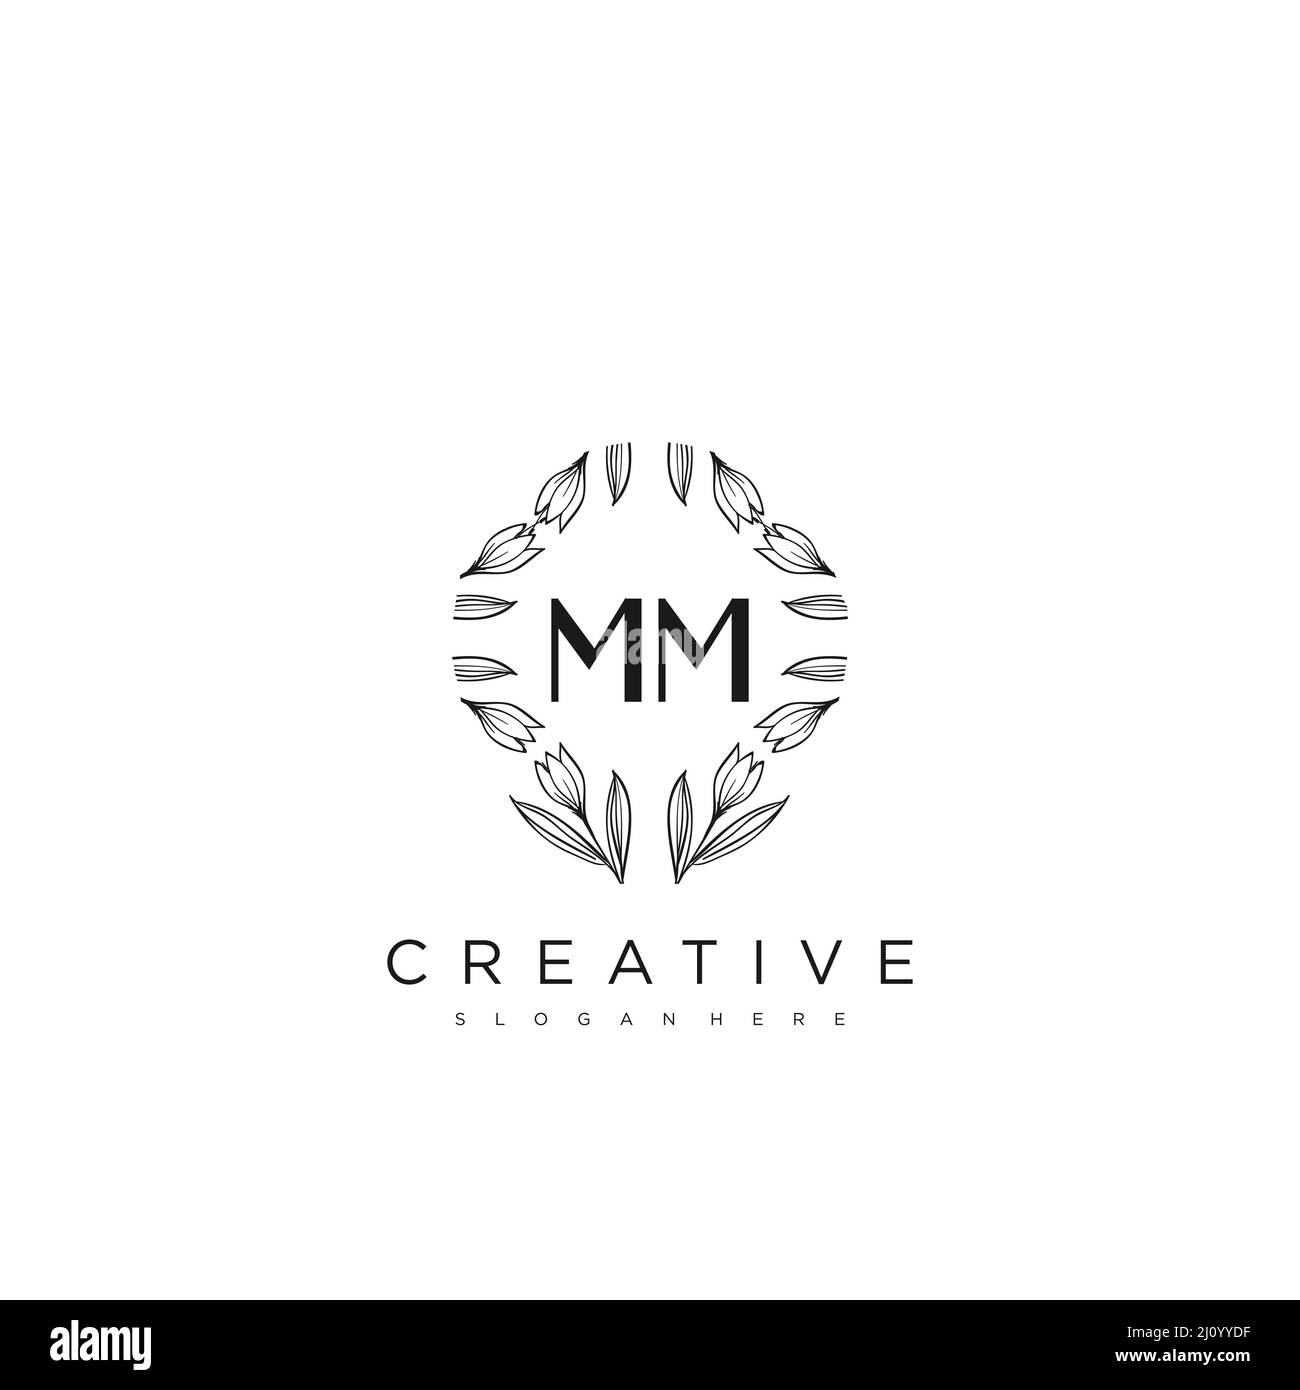 Love with the initials mm logo design template Vector Image